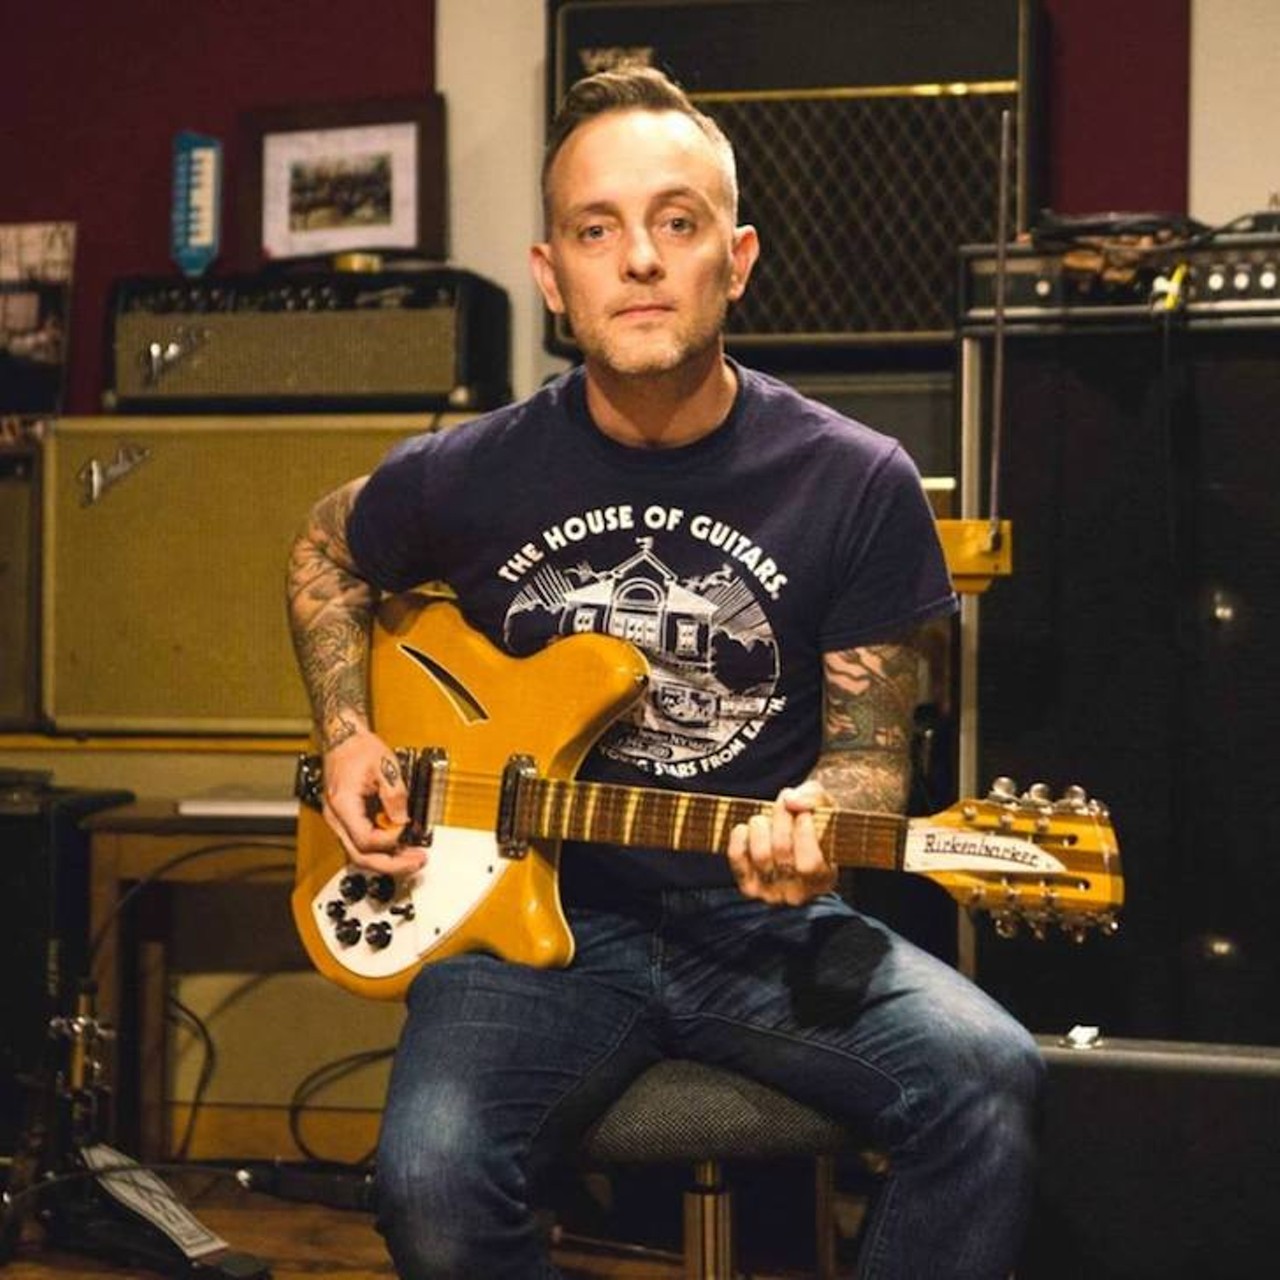 Saturday, Sept. 7Dave Hause & the Mermaid at Will's Pub